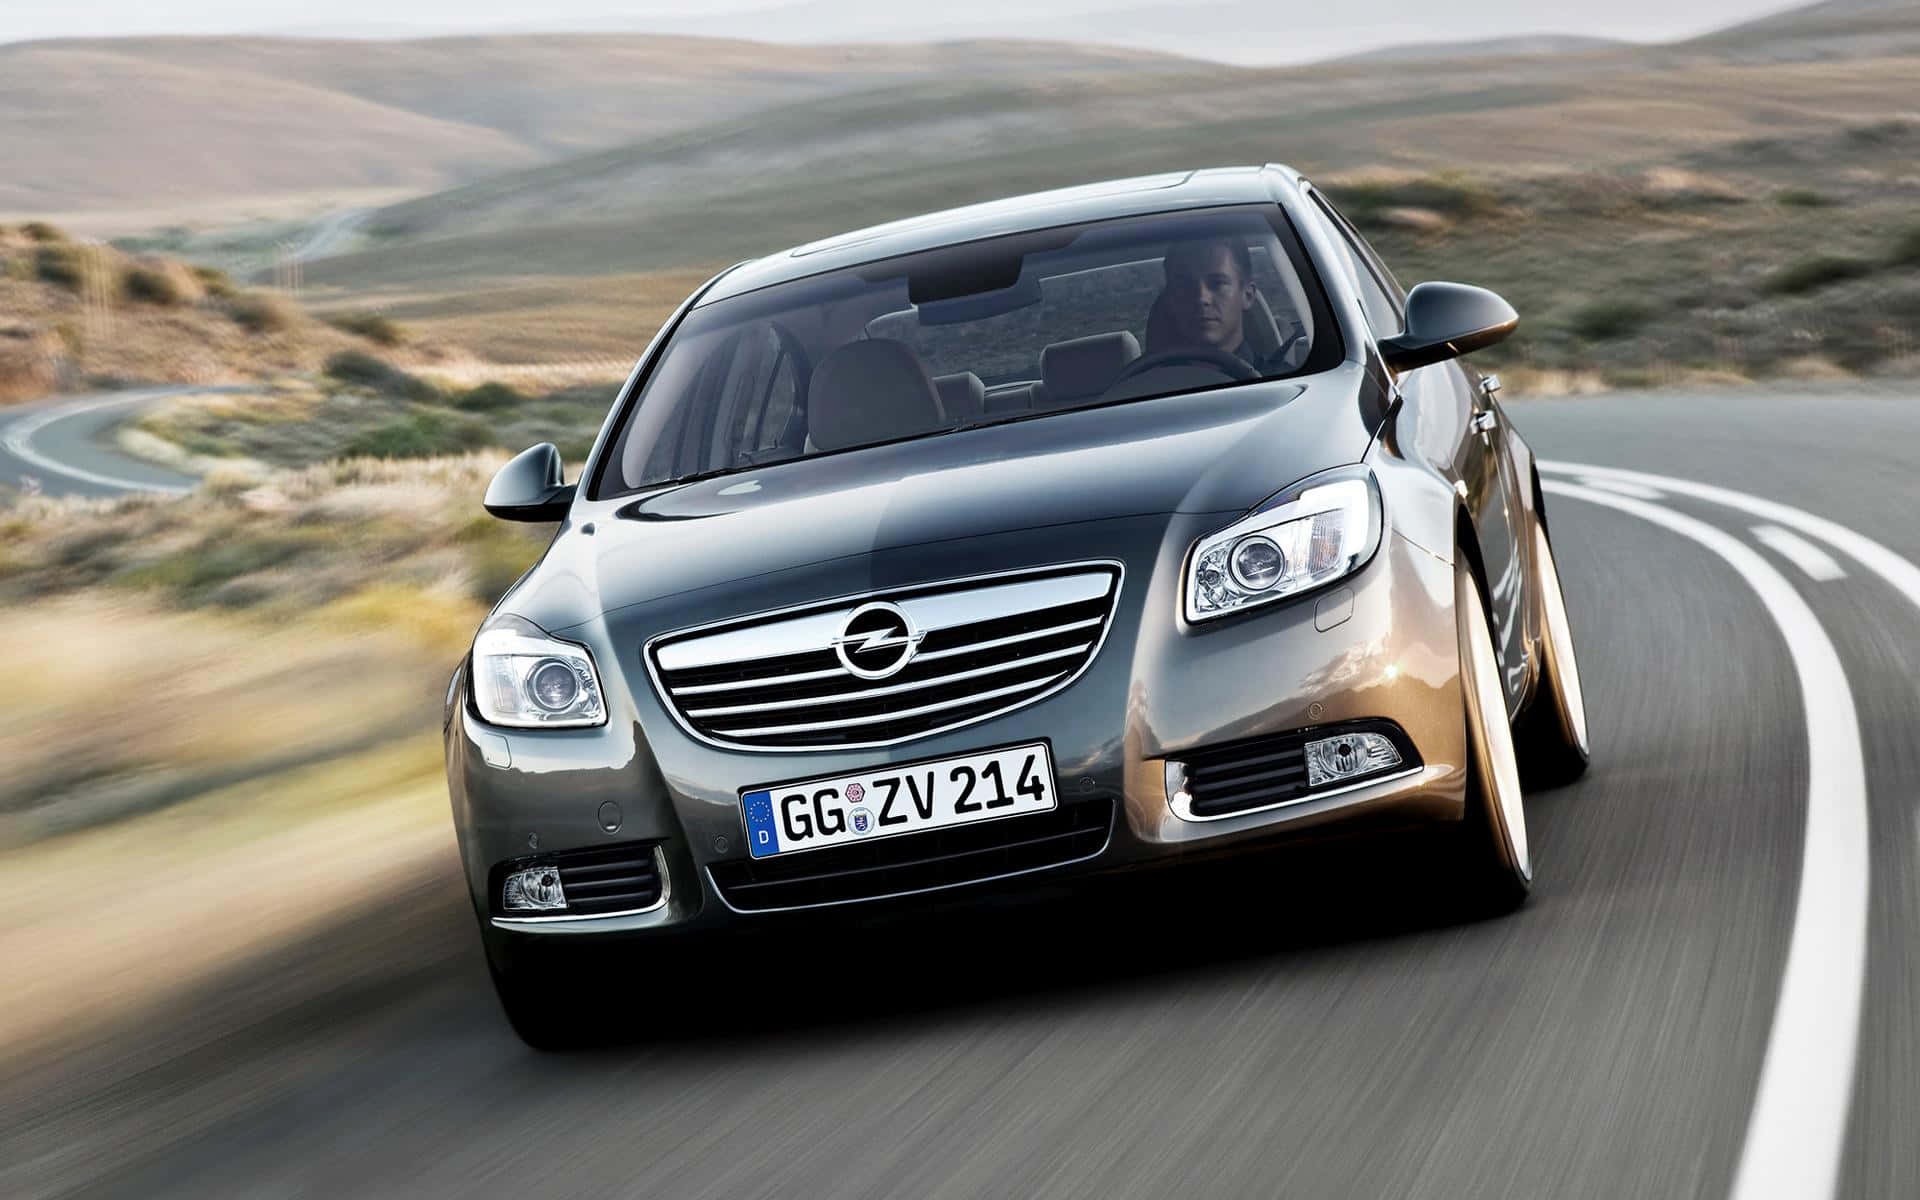 Stunning Opel Insignia on the Road Wallpaper